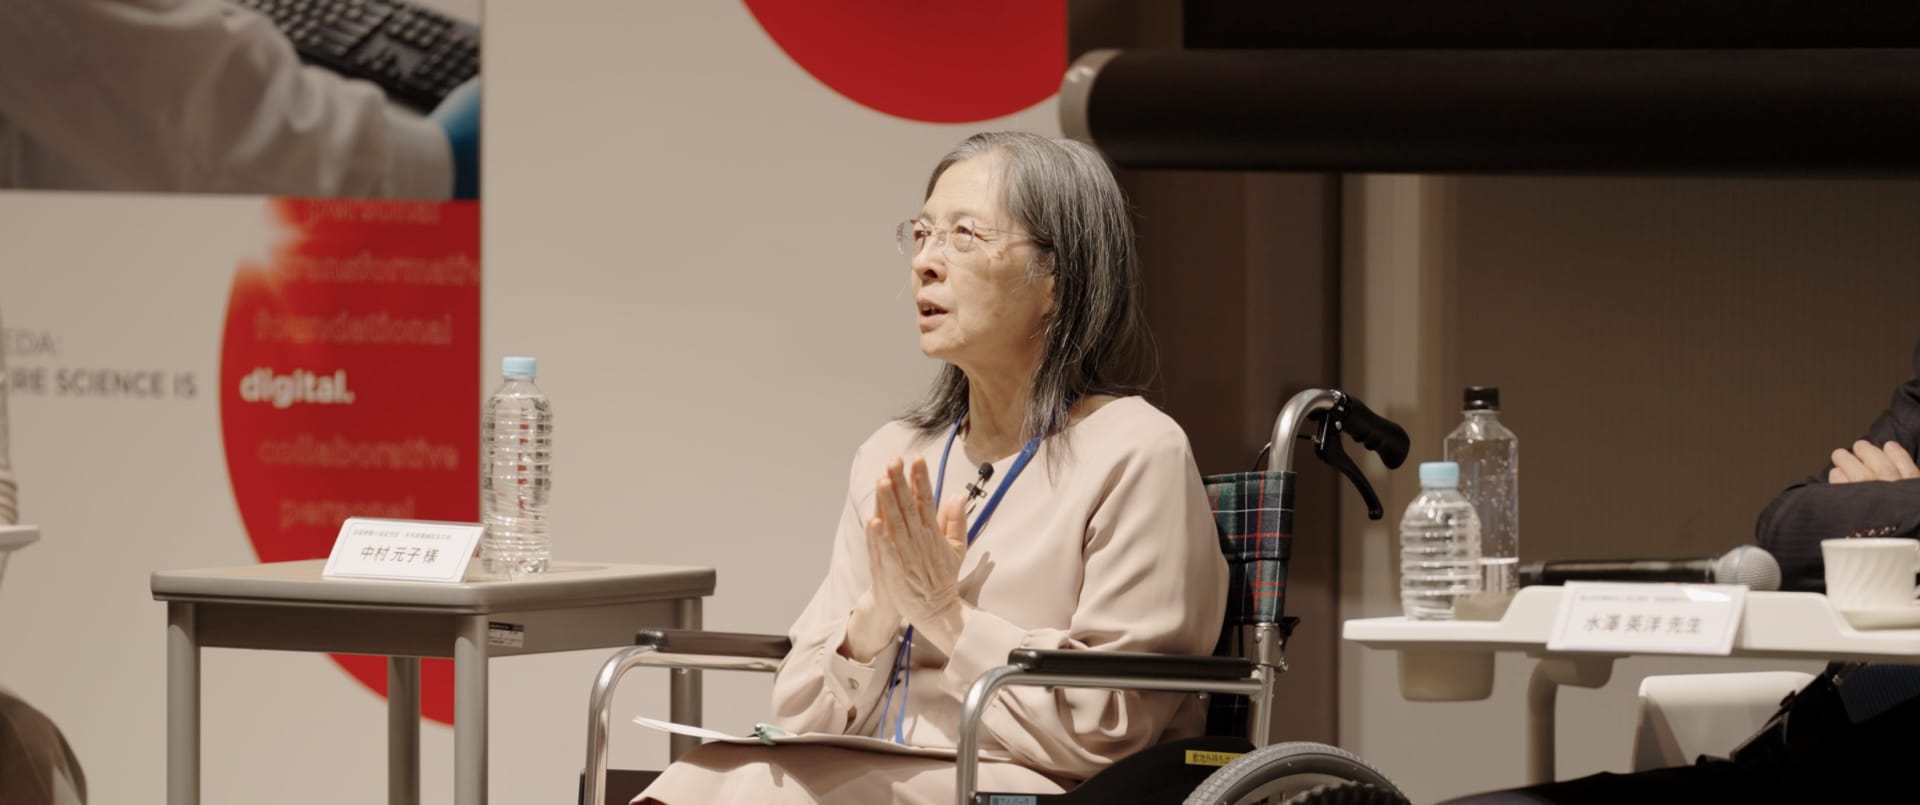 A person in a wheelchair is participating in a panel discussion at an event.